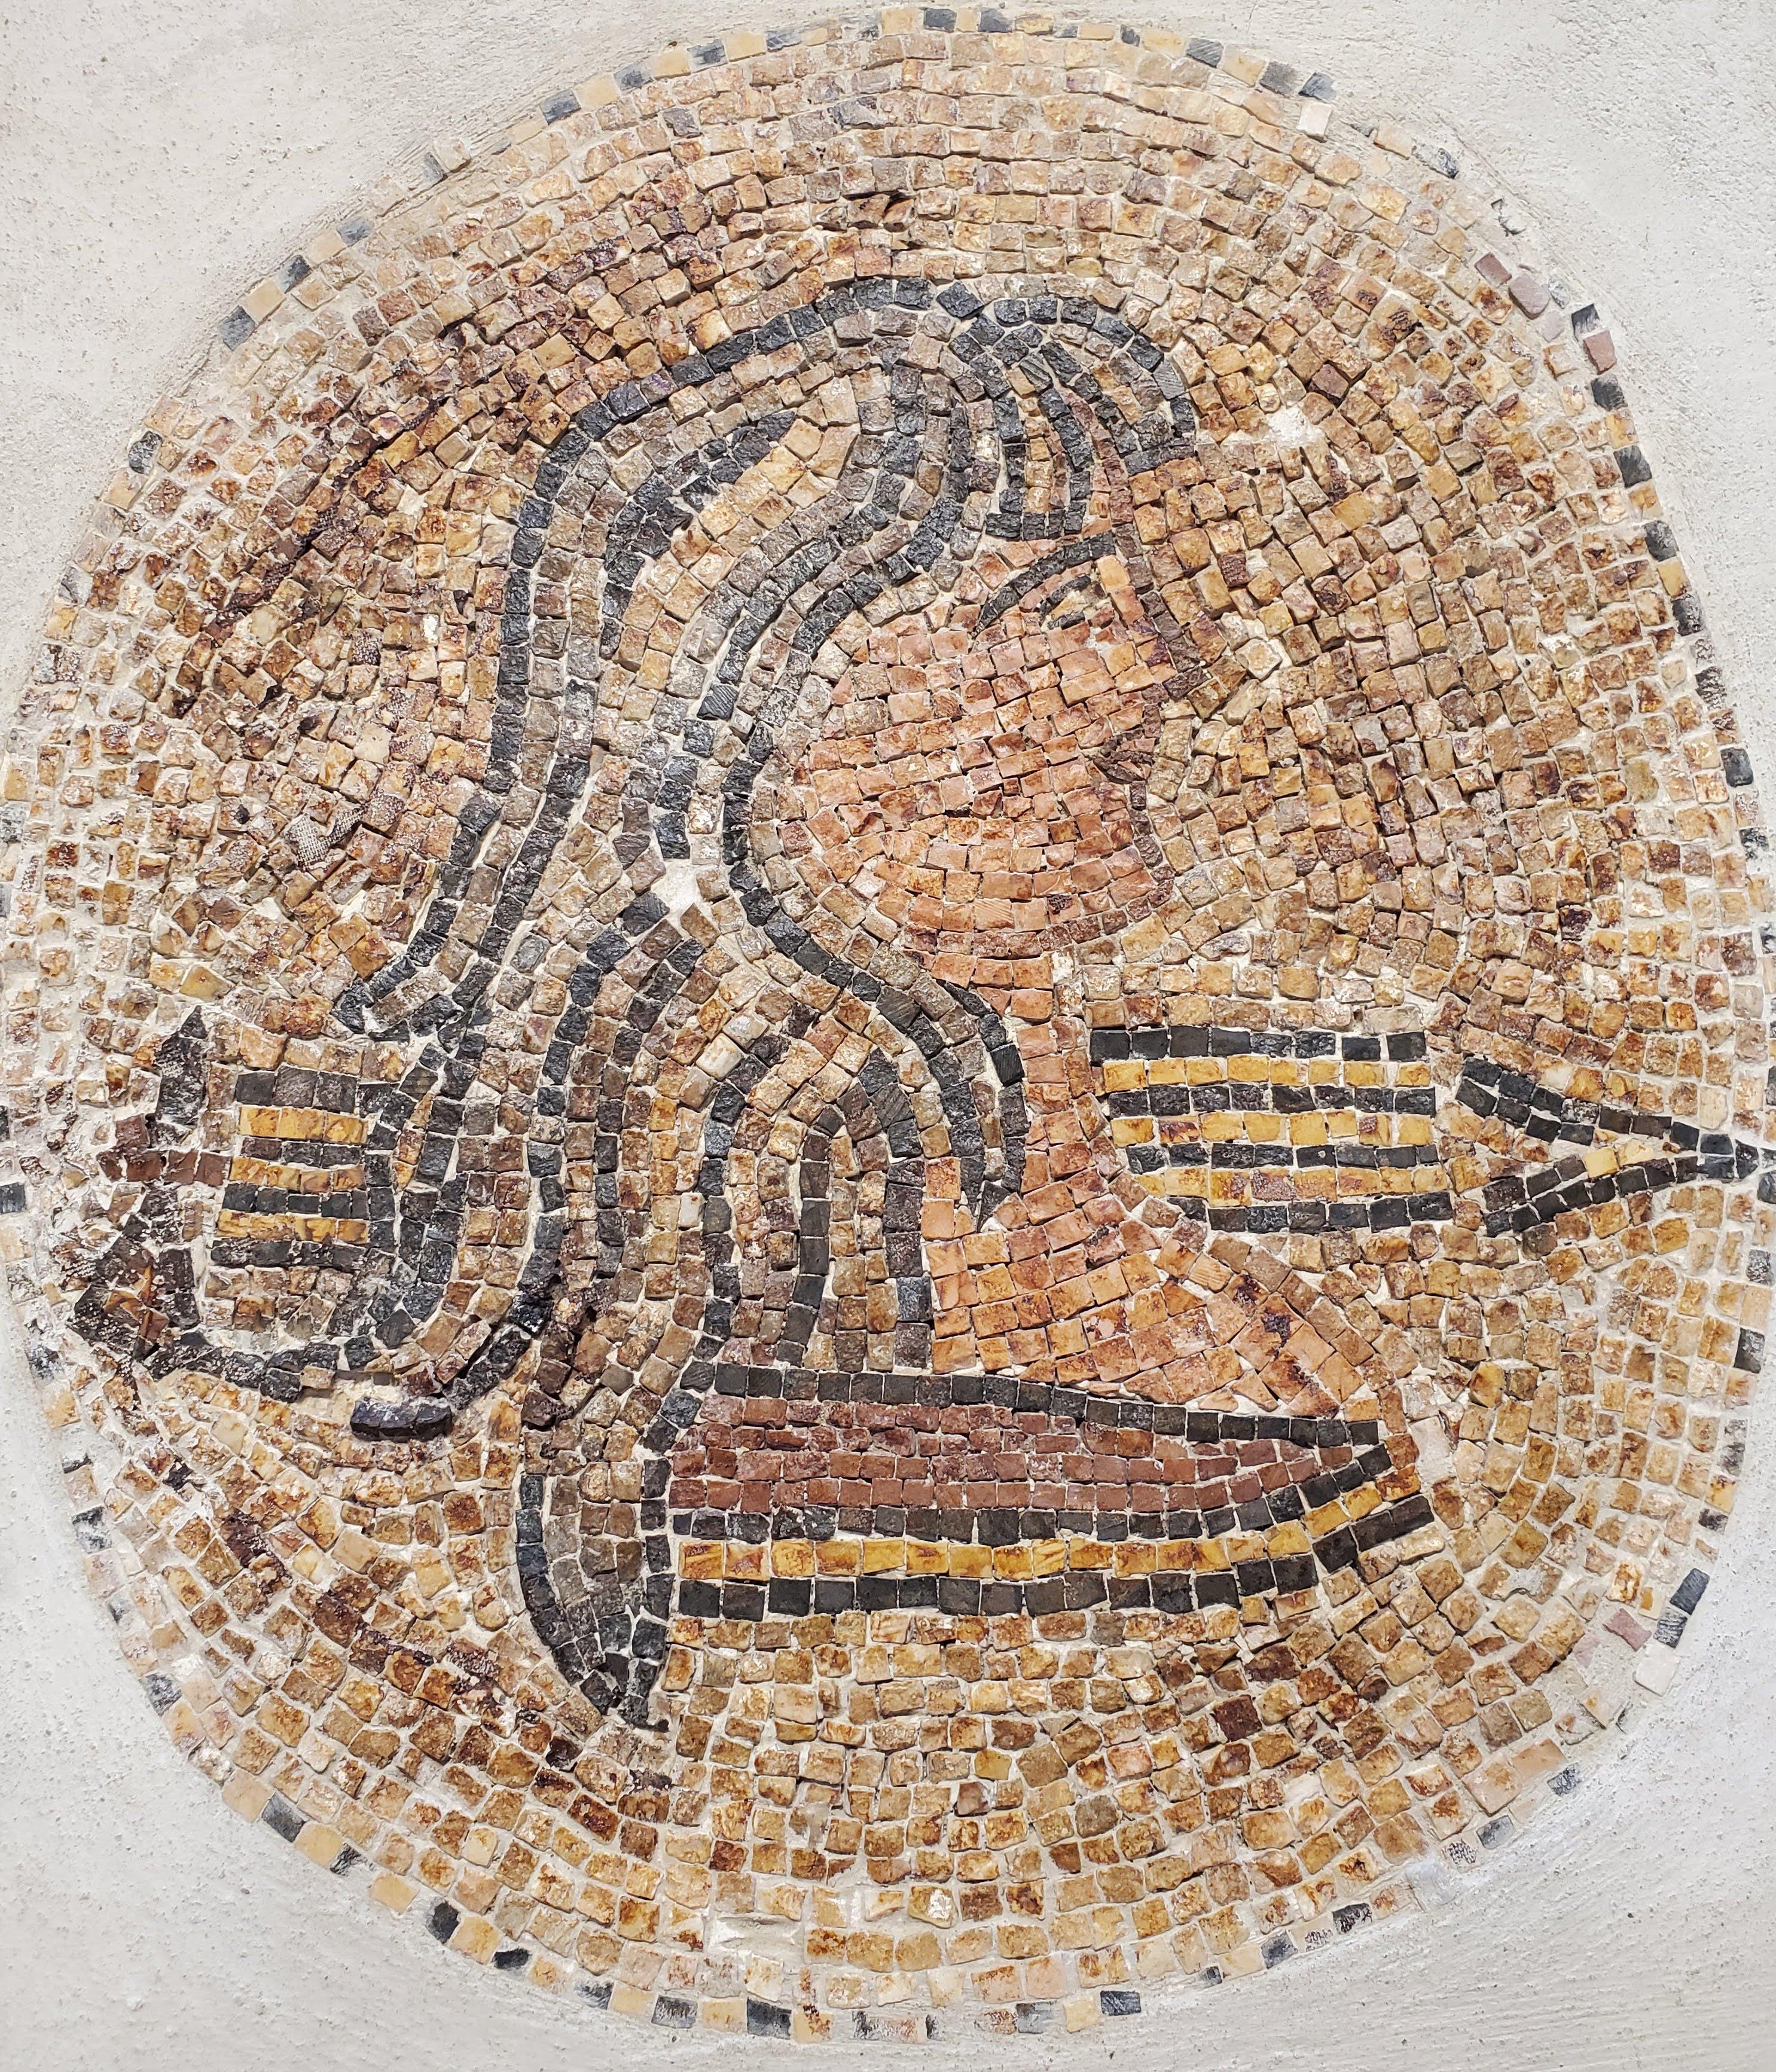 This incredible Roman micro-mosaic portrait of a woman shows off a woman warrior in all her glory. Not only interesting because of its age, the subject makes it even more unique. Believed to have been lifted from the floor of a roman structure, then